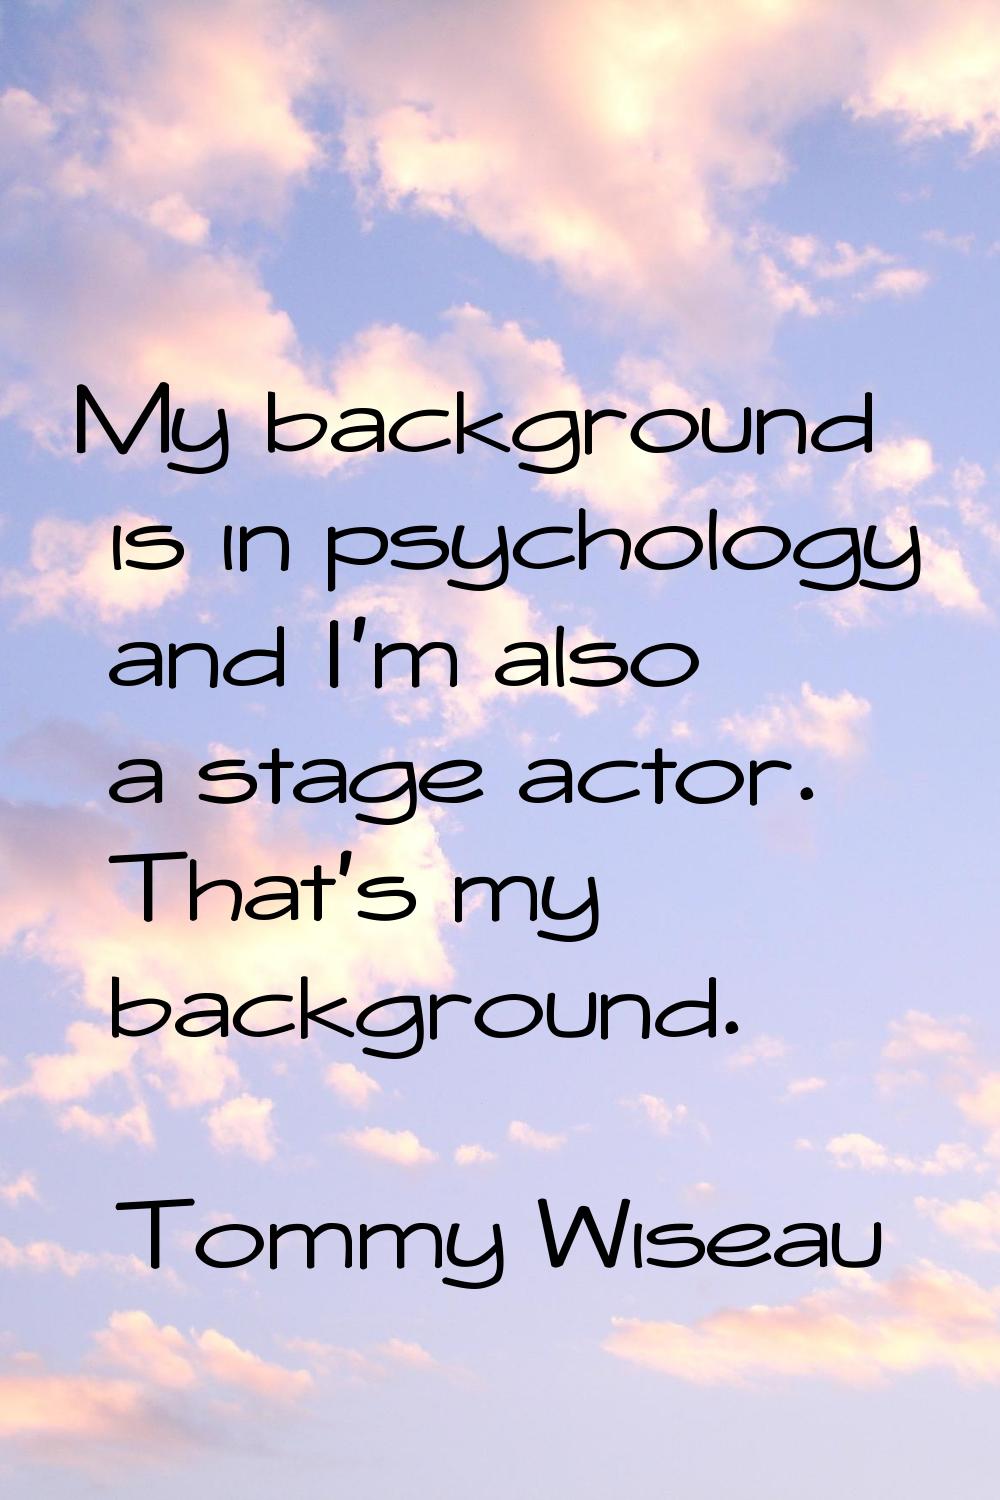 My background is in psychology and I'm also a stage actor. That's my background.